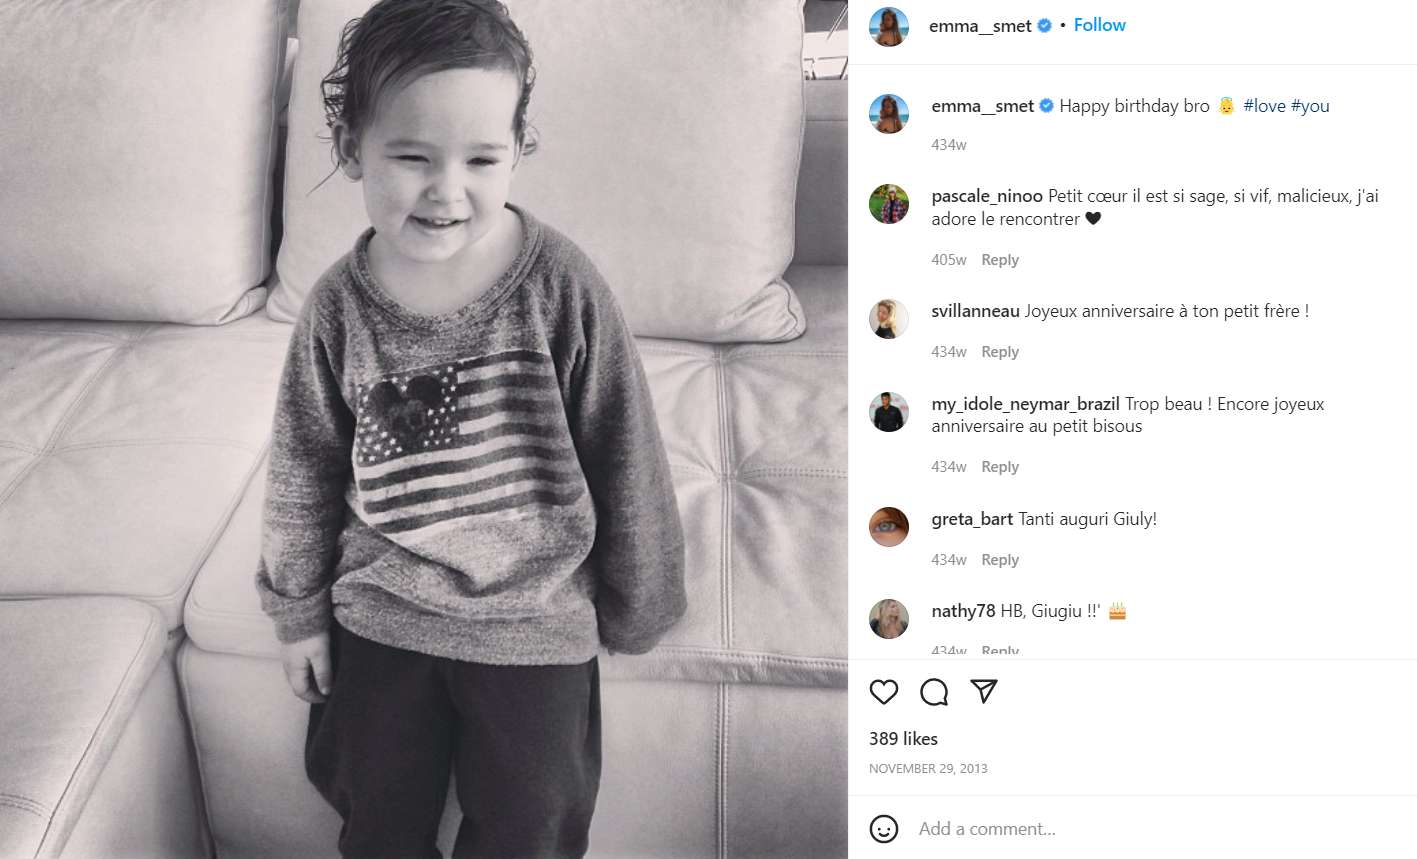 Emma Smet posted a birthday photo of her brother on her Instagram